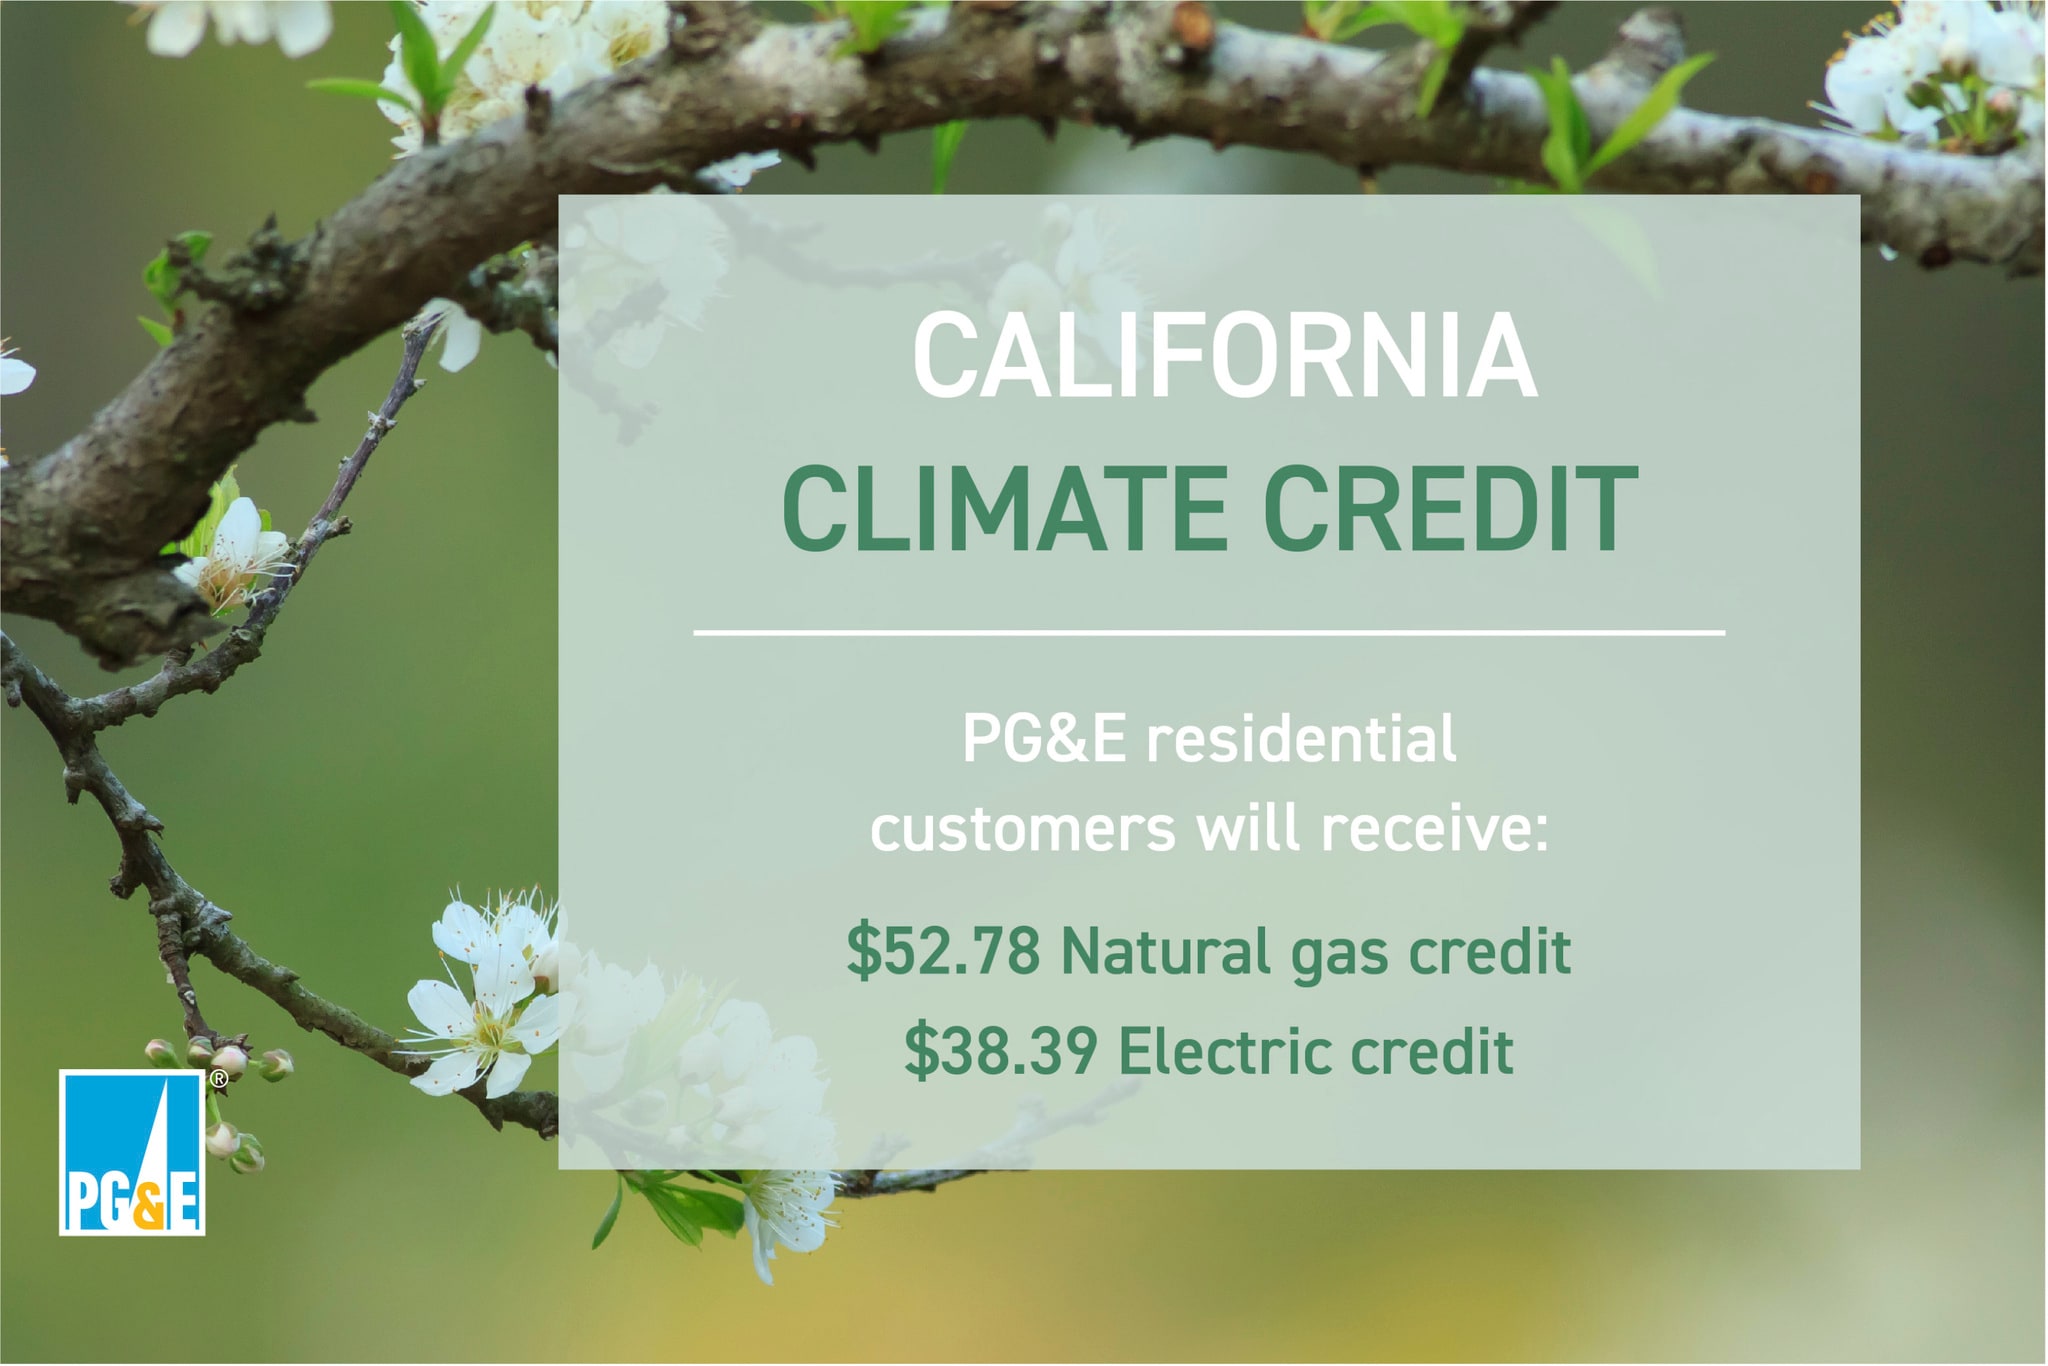 california-climate-credit-totaling-up-to-91-17-to-help-customers-with